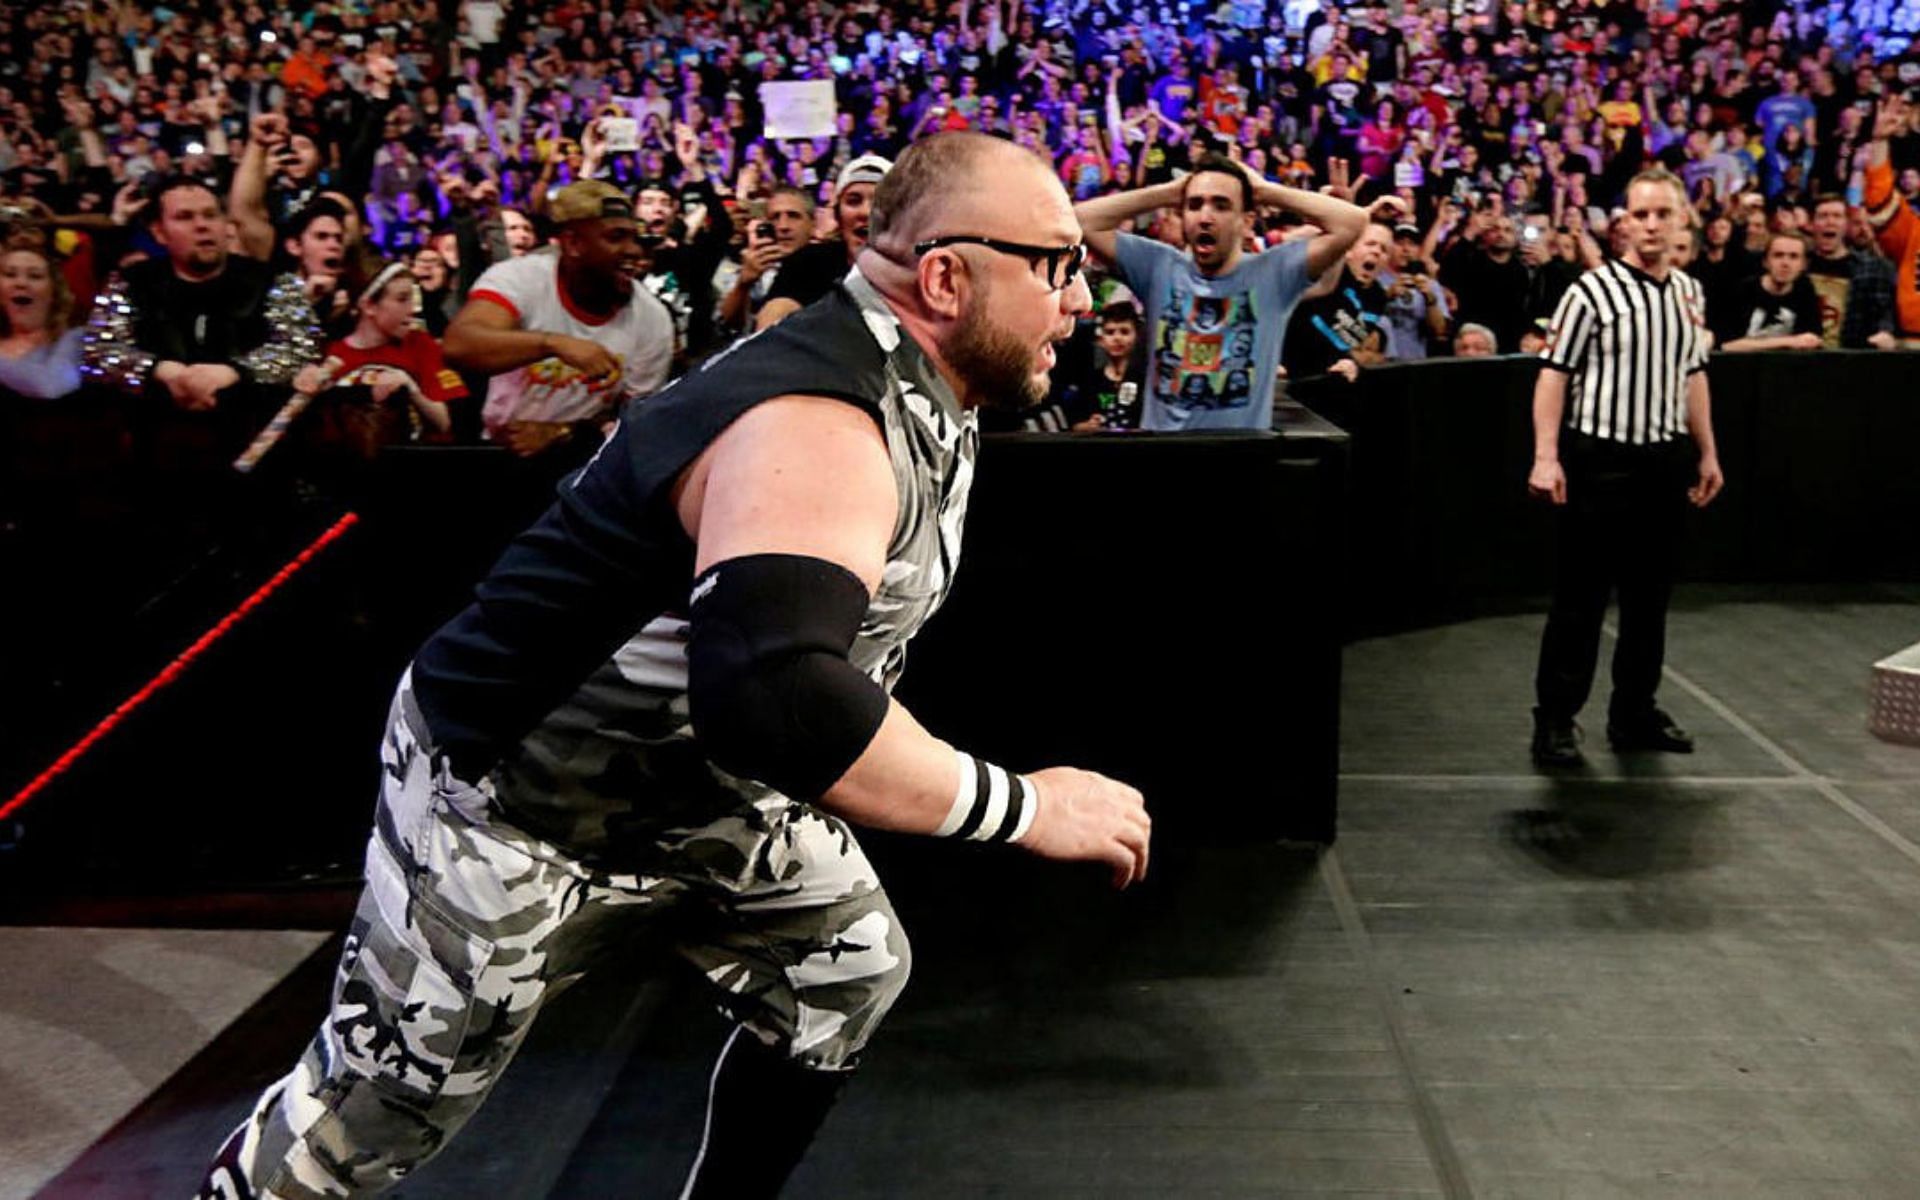 WWE Hall of Famer Bubba Ray Dudley.